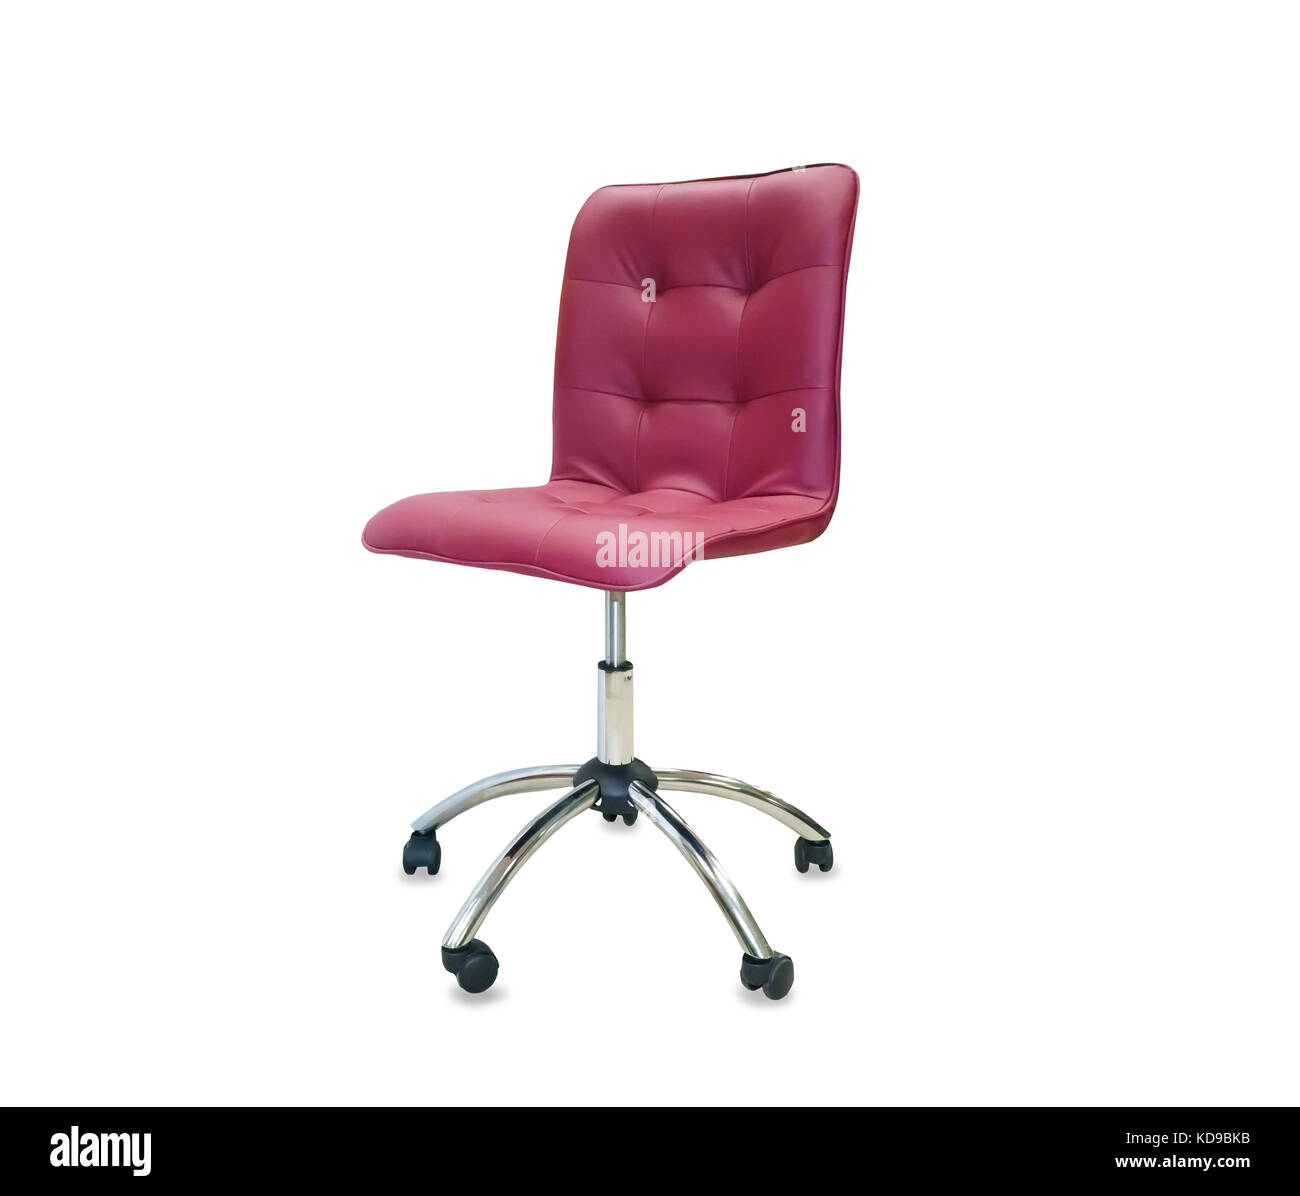 The office chair from red leather. Isolated Stock Photo